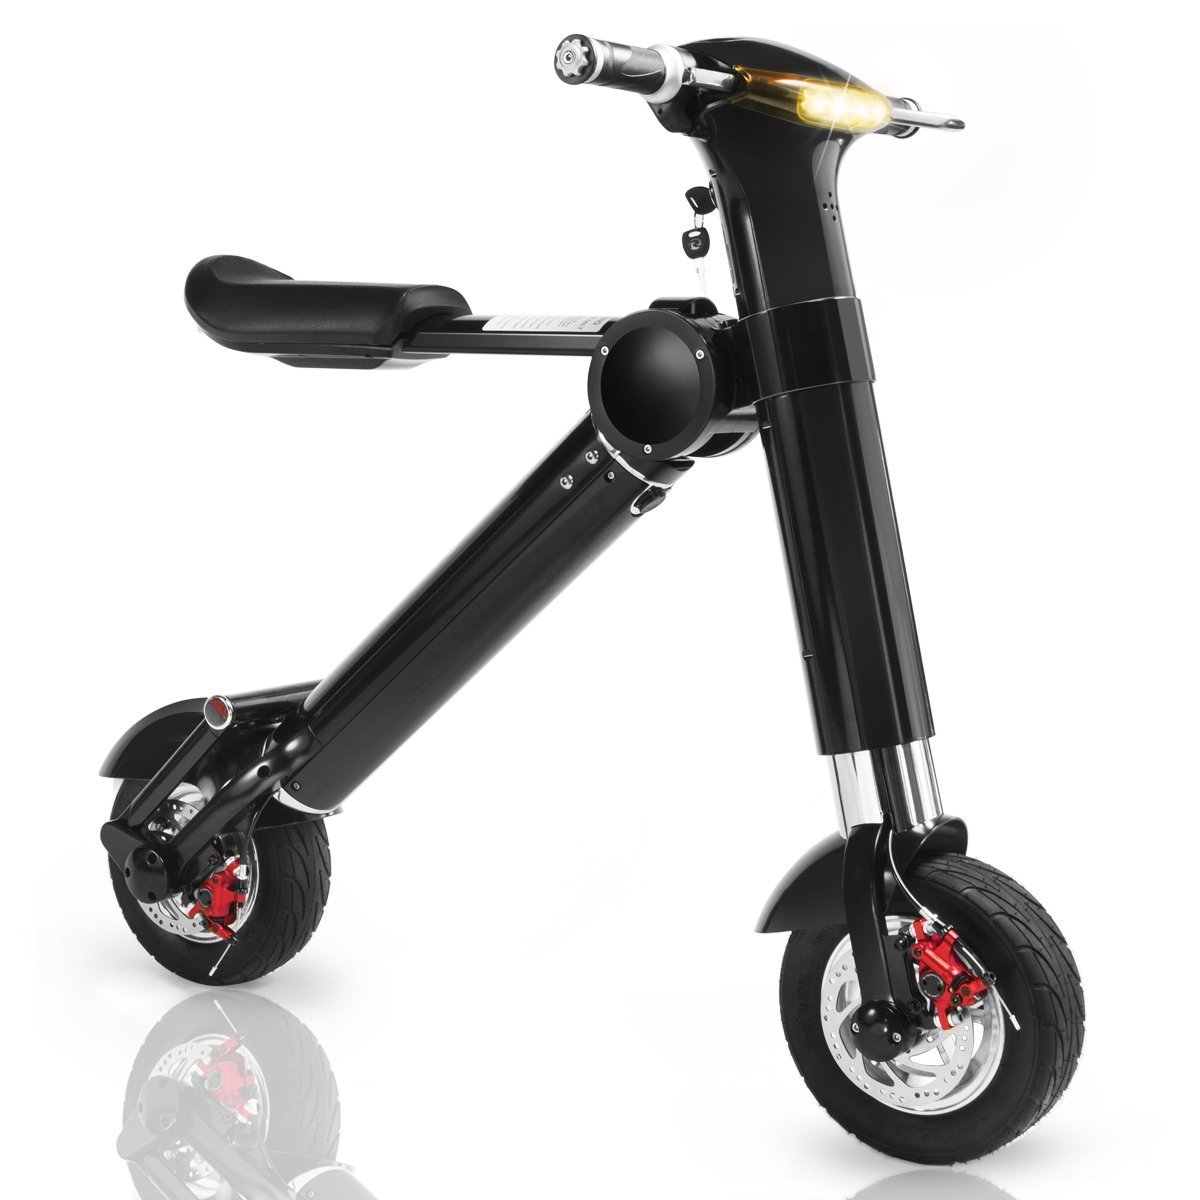 Buy GOFAST 50 KMPH Folding Electric Bicycle, Black Online at Low Prices in  India - Amazon.in